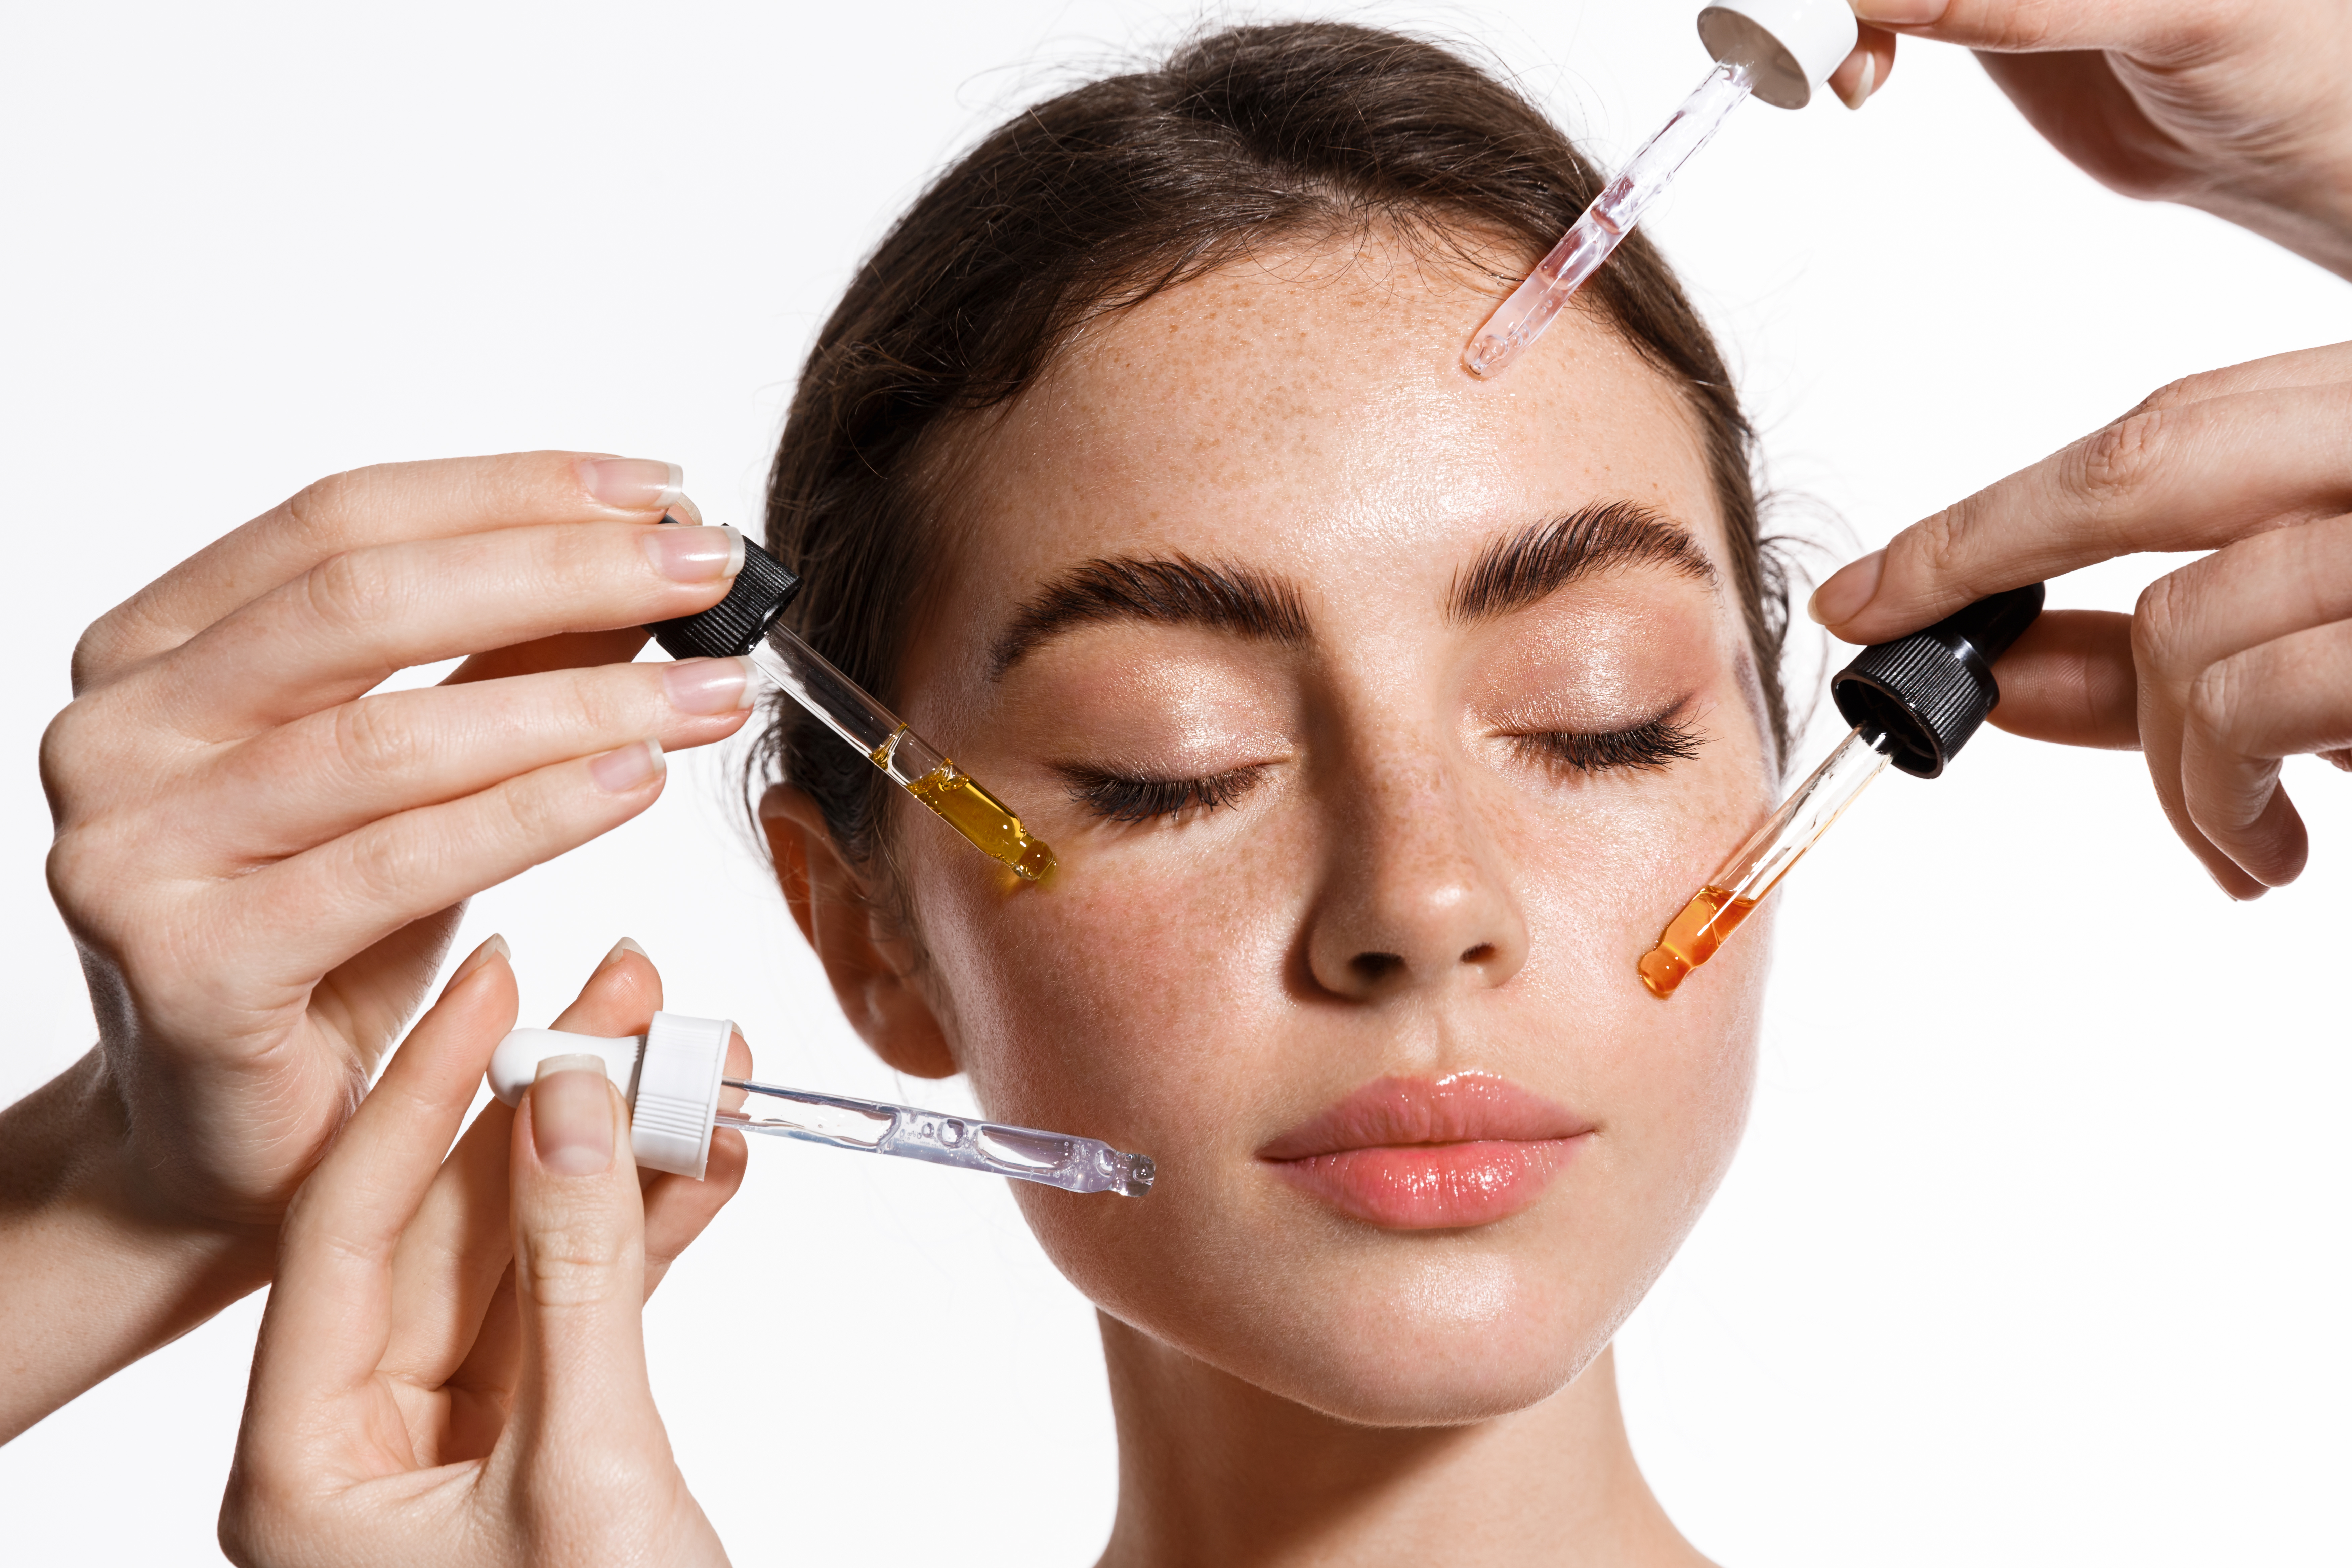 Many medicine droppers of serums putting antiaging serums skin care products on the face